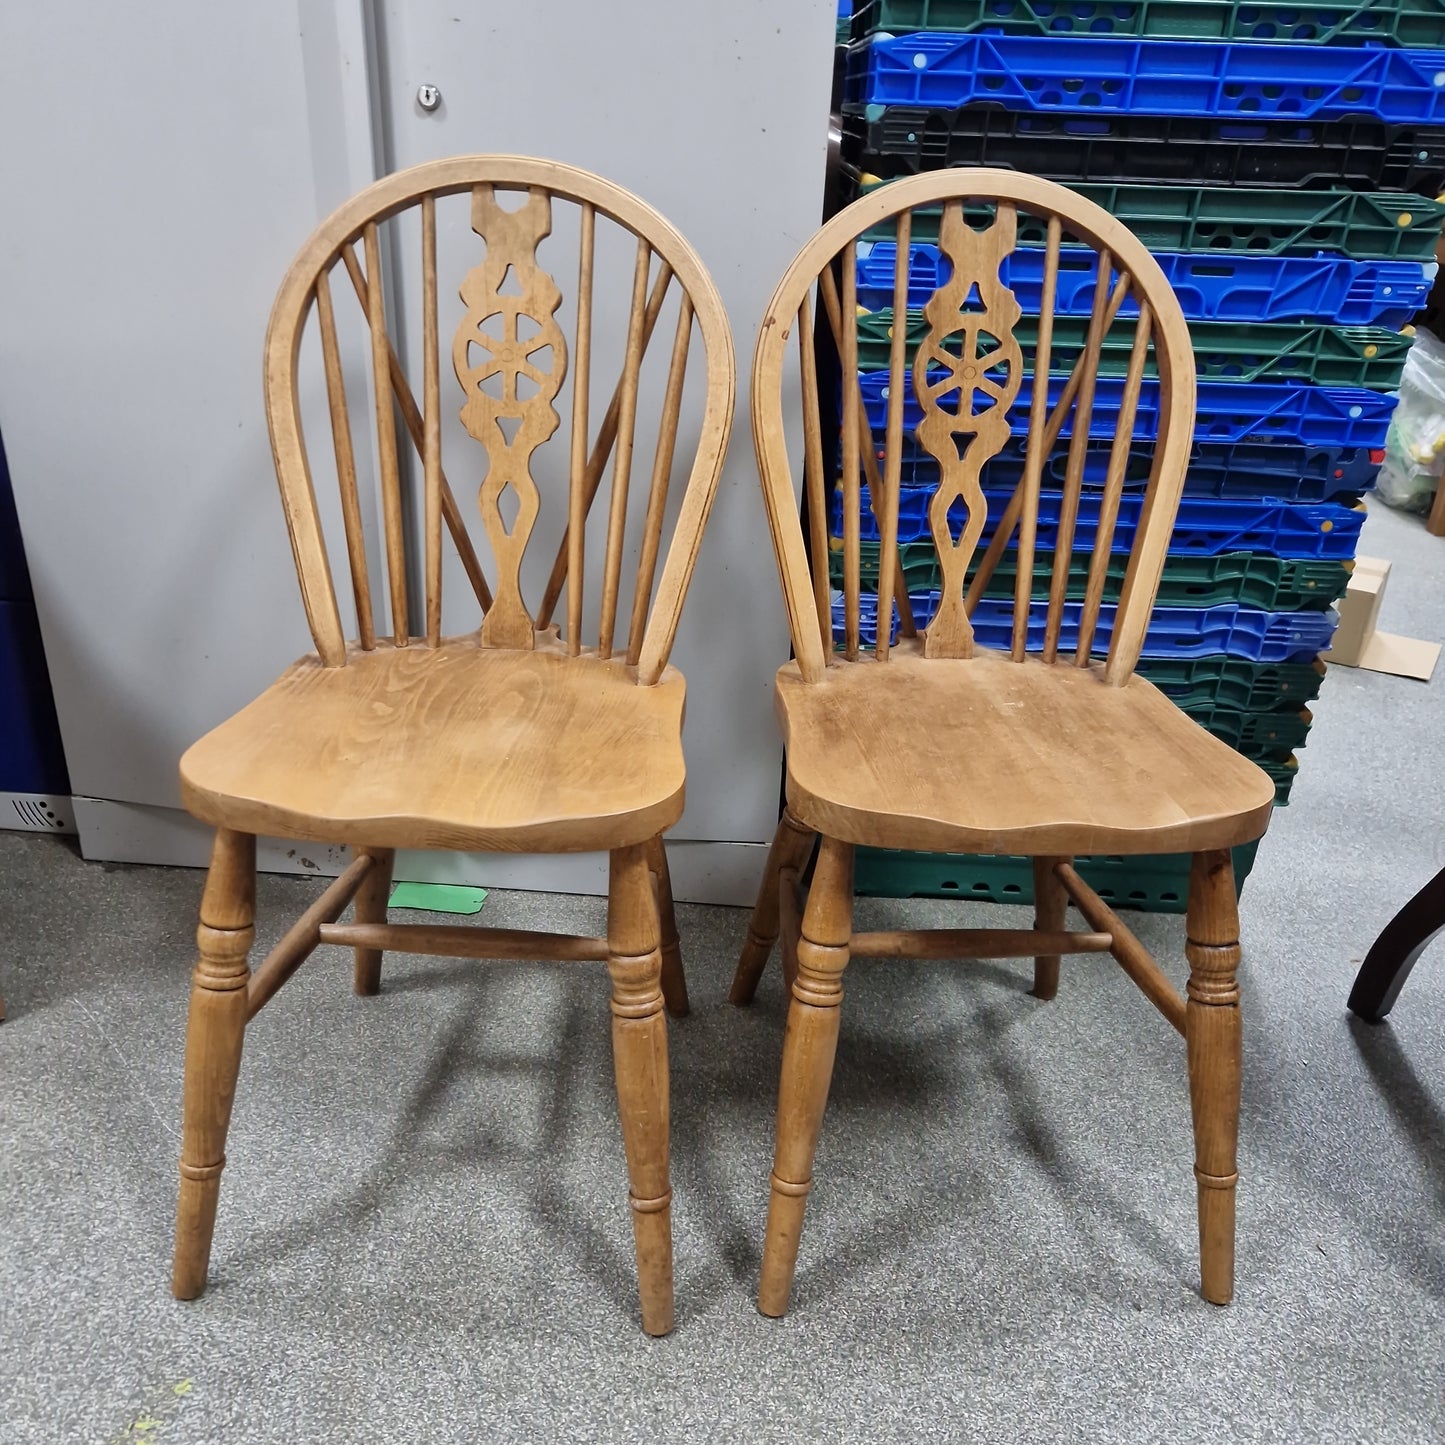 2 solid wood dining chairs (190909)